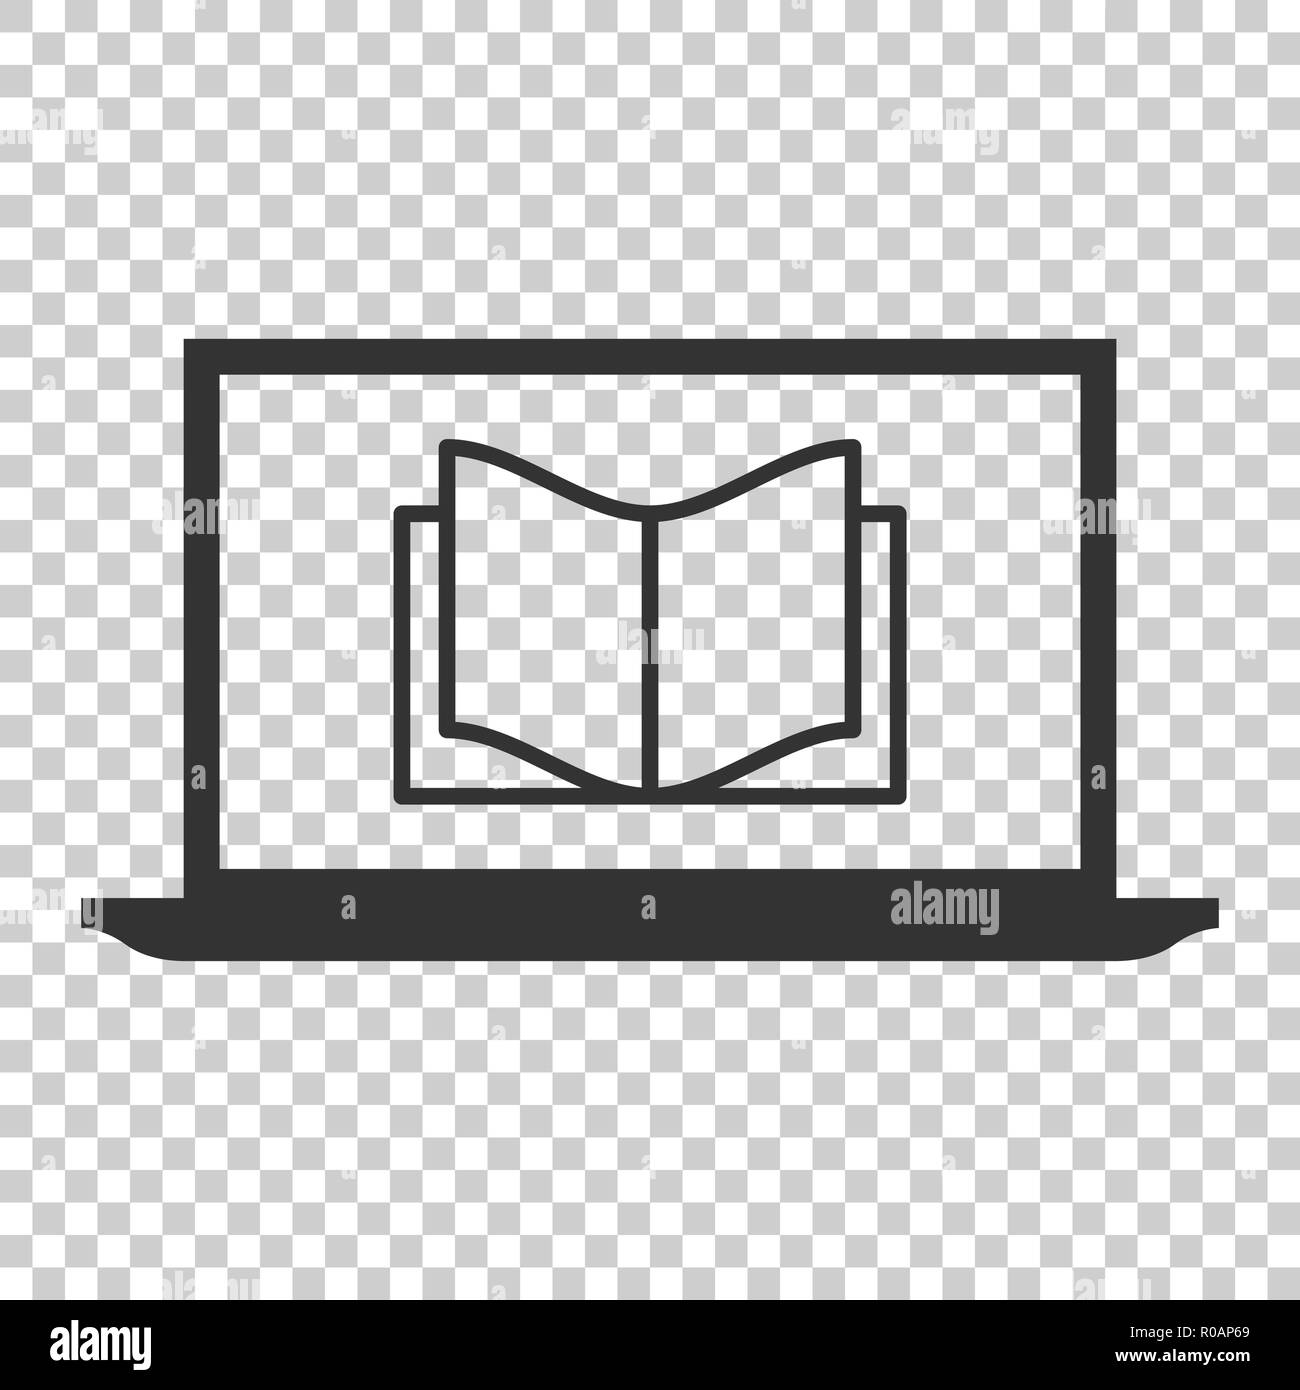 Elearning education icon in flat style. Study vector illustration on isolated background. Laptop computer online training business concept. Stock Vector